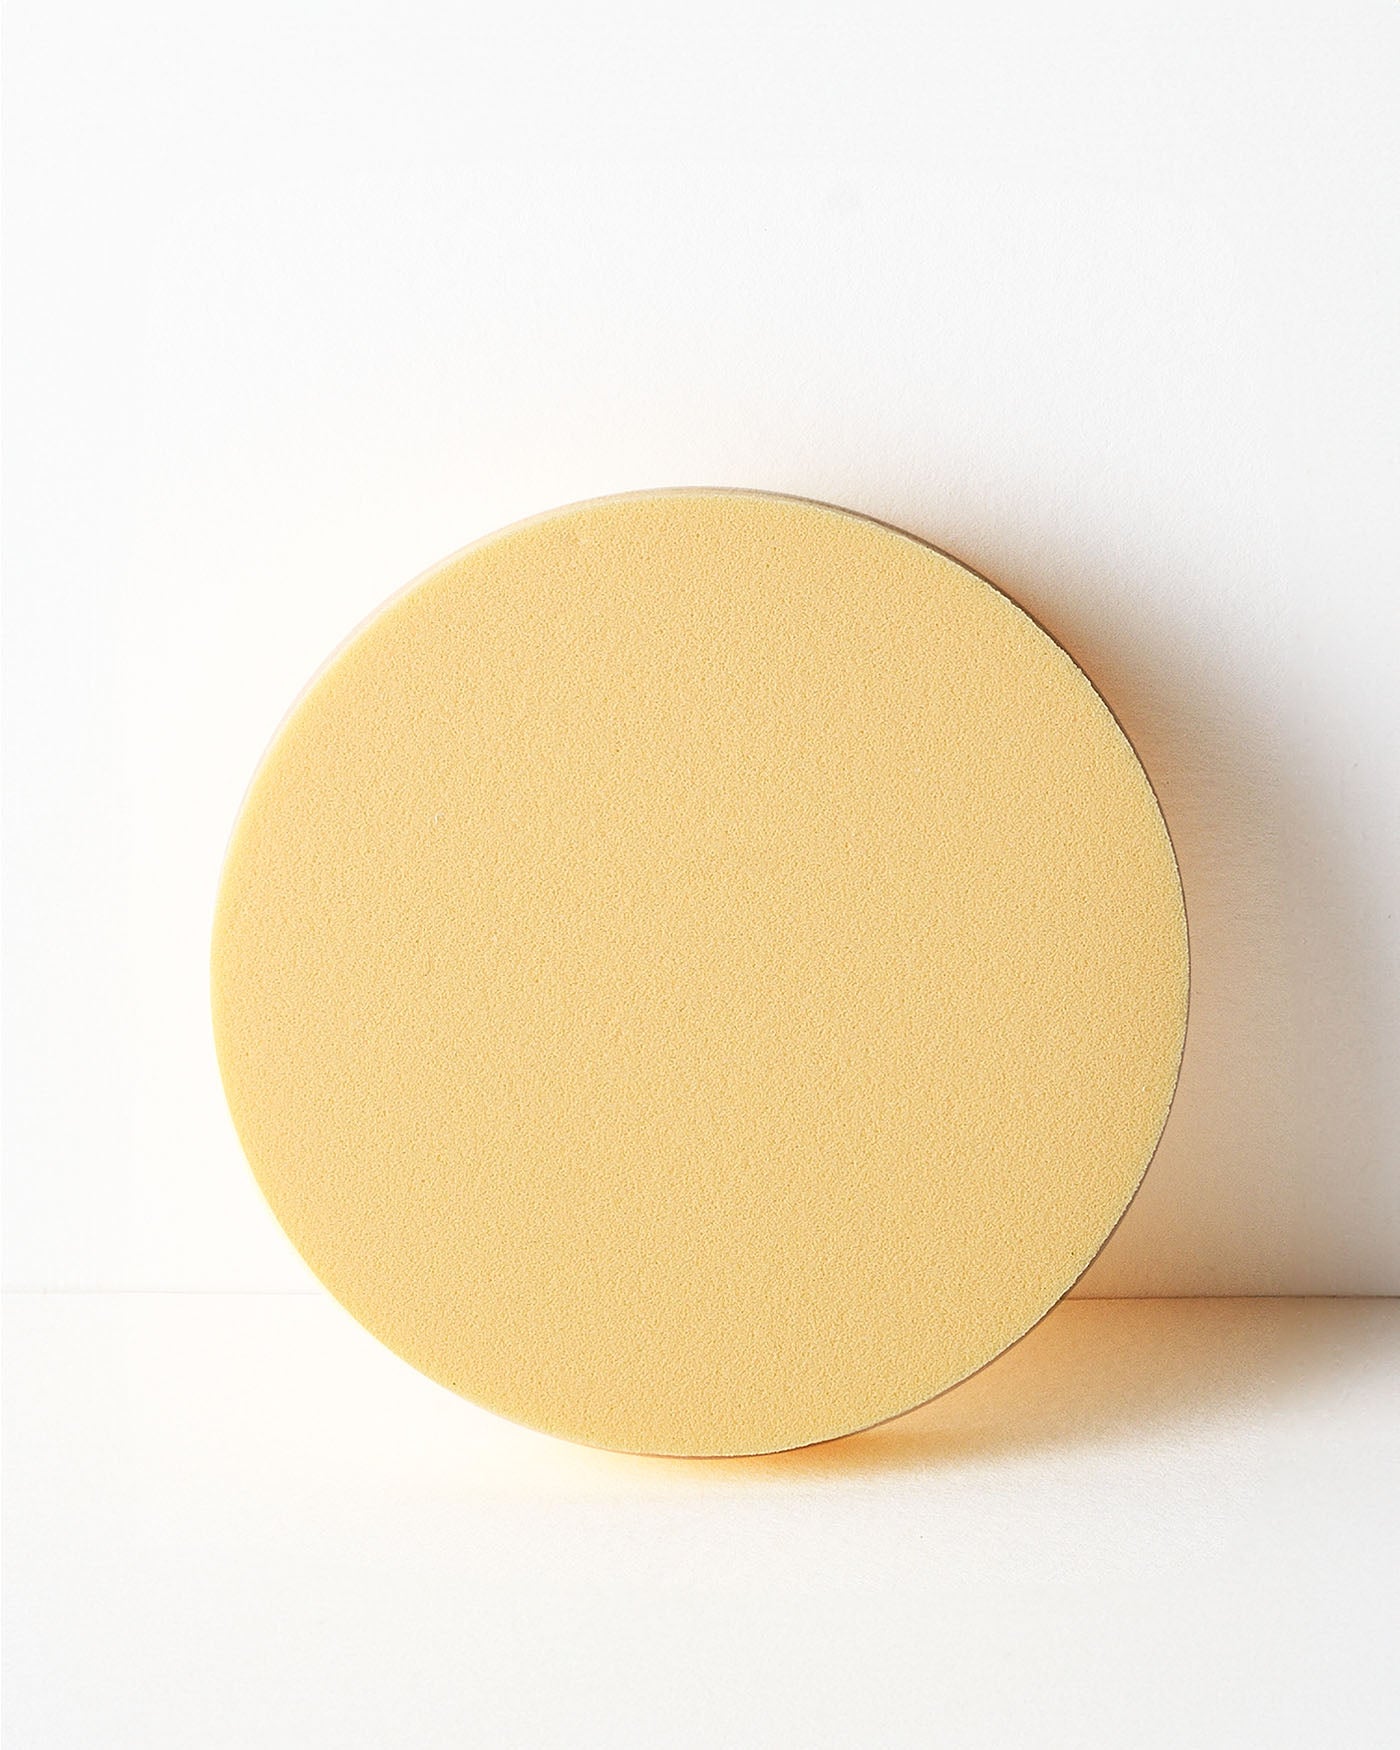 FOUNDATION SPONGE - All Products - Astra Make-Up